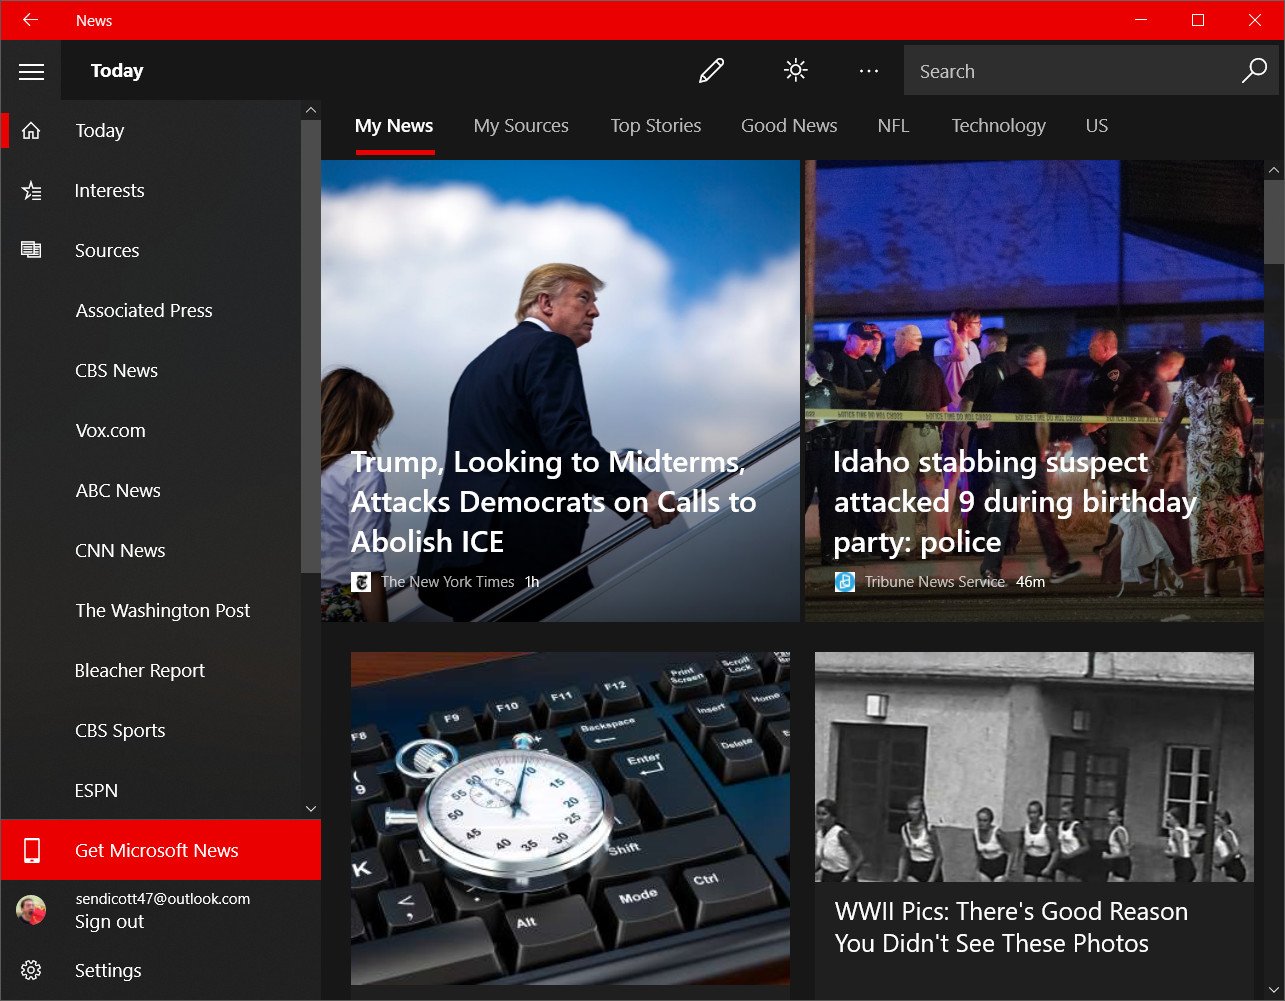 A first look at the new Microsoft News app for Windows 10 